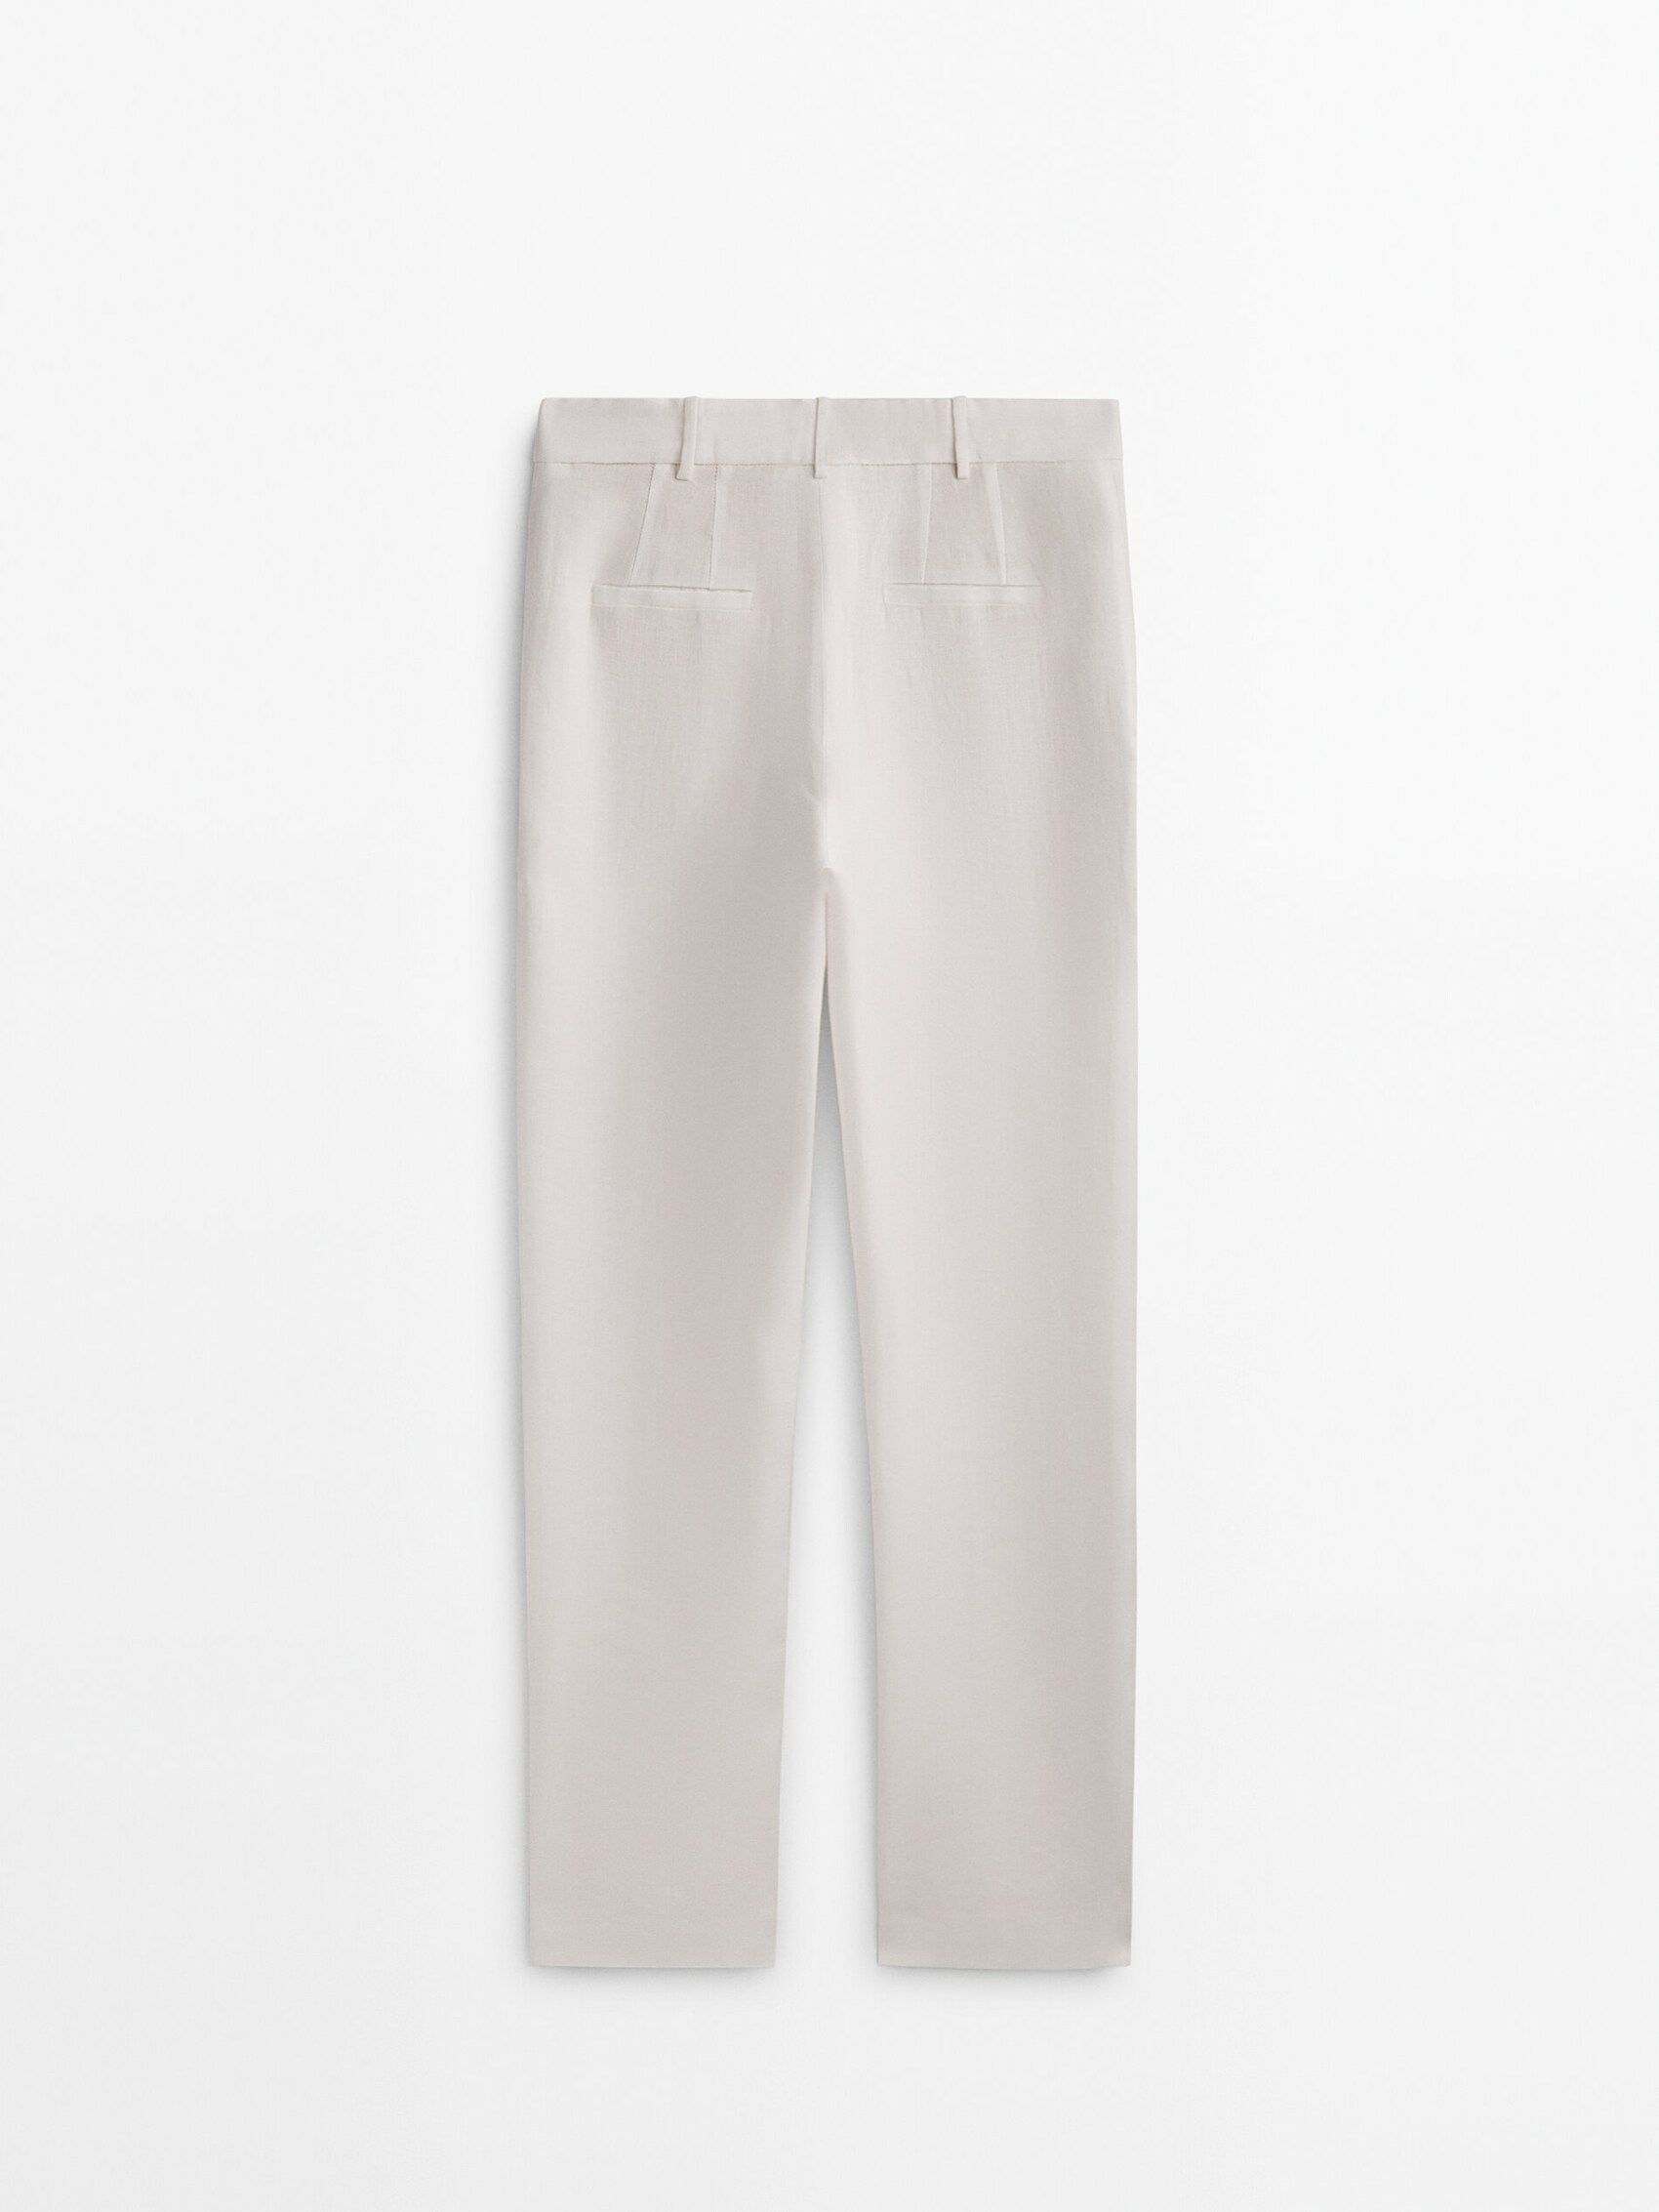 100% linen double darted suit trousers | Massimo Dutti (US)